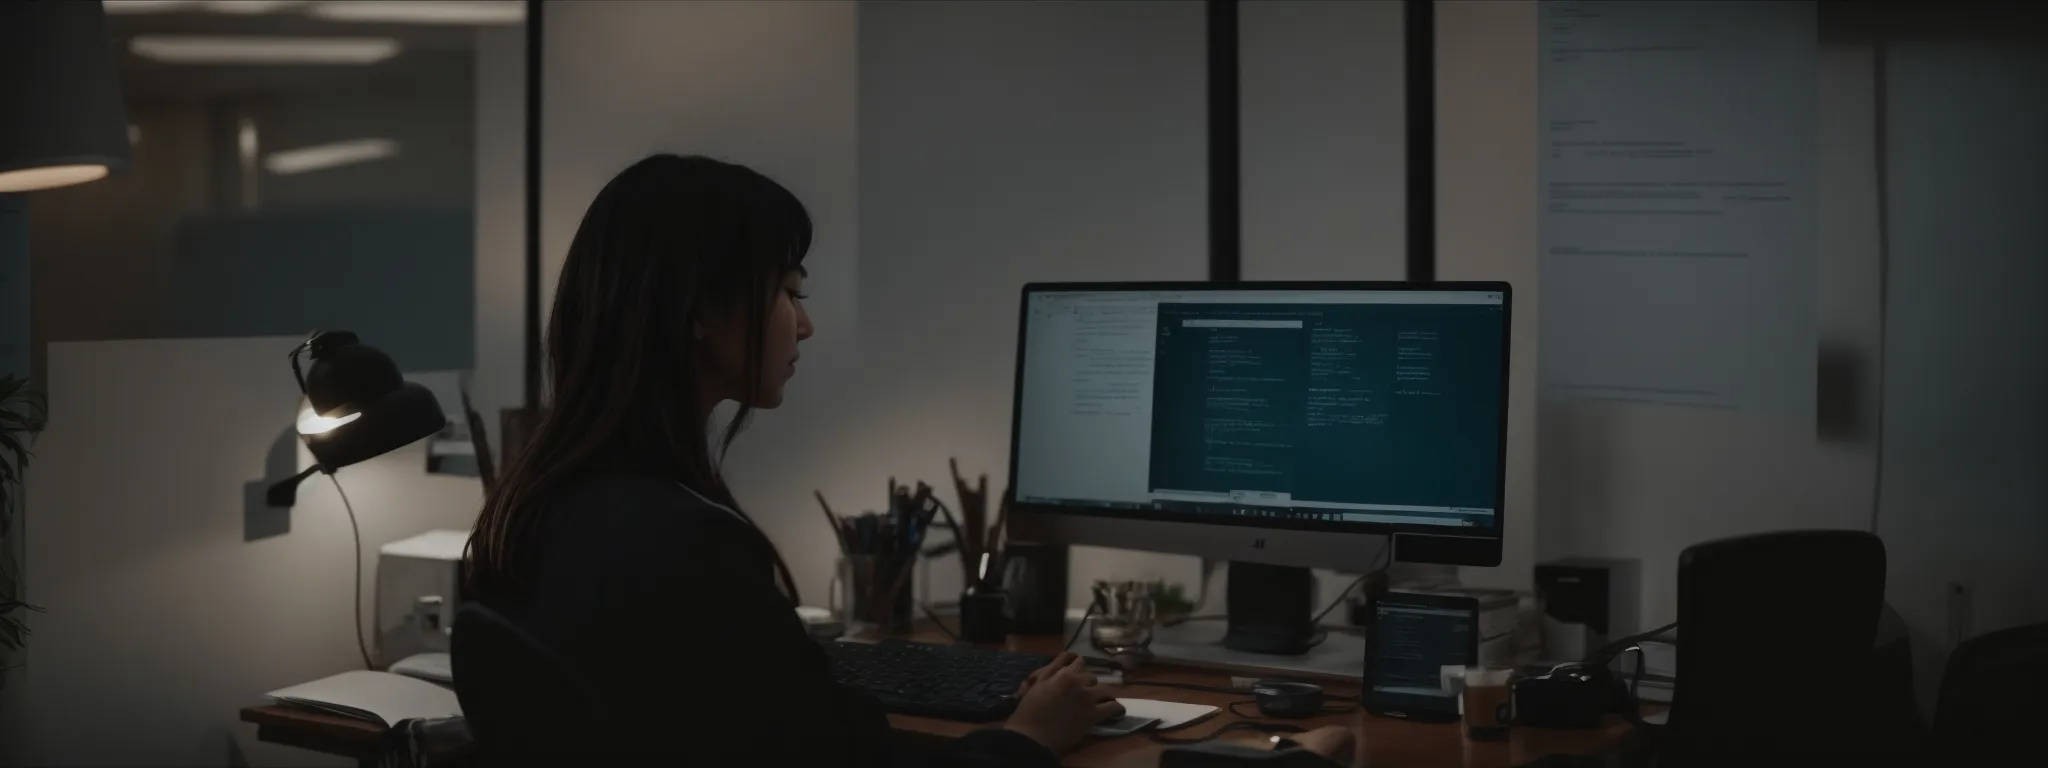 a person at a desk with a computer screen displaying a search engine results page amidst a serene office space.